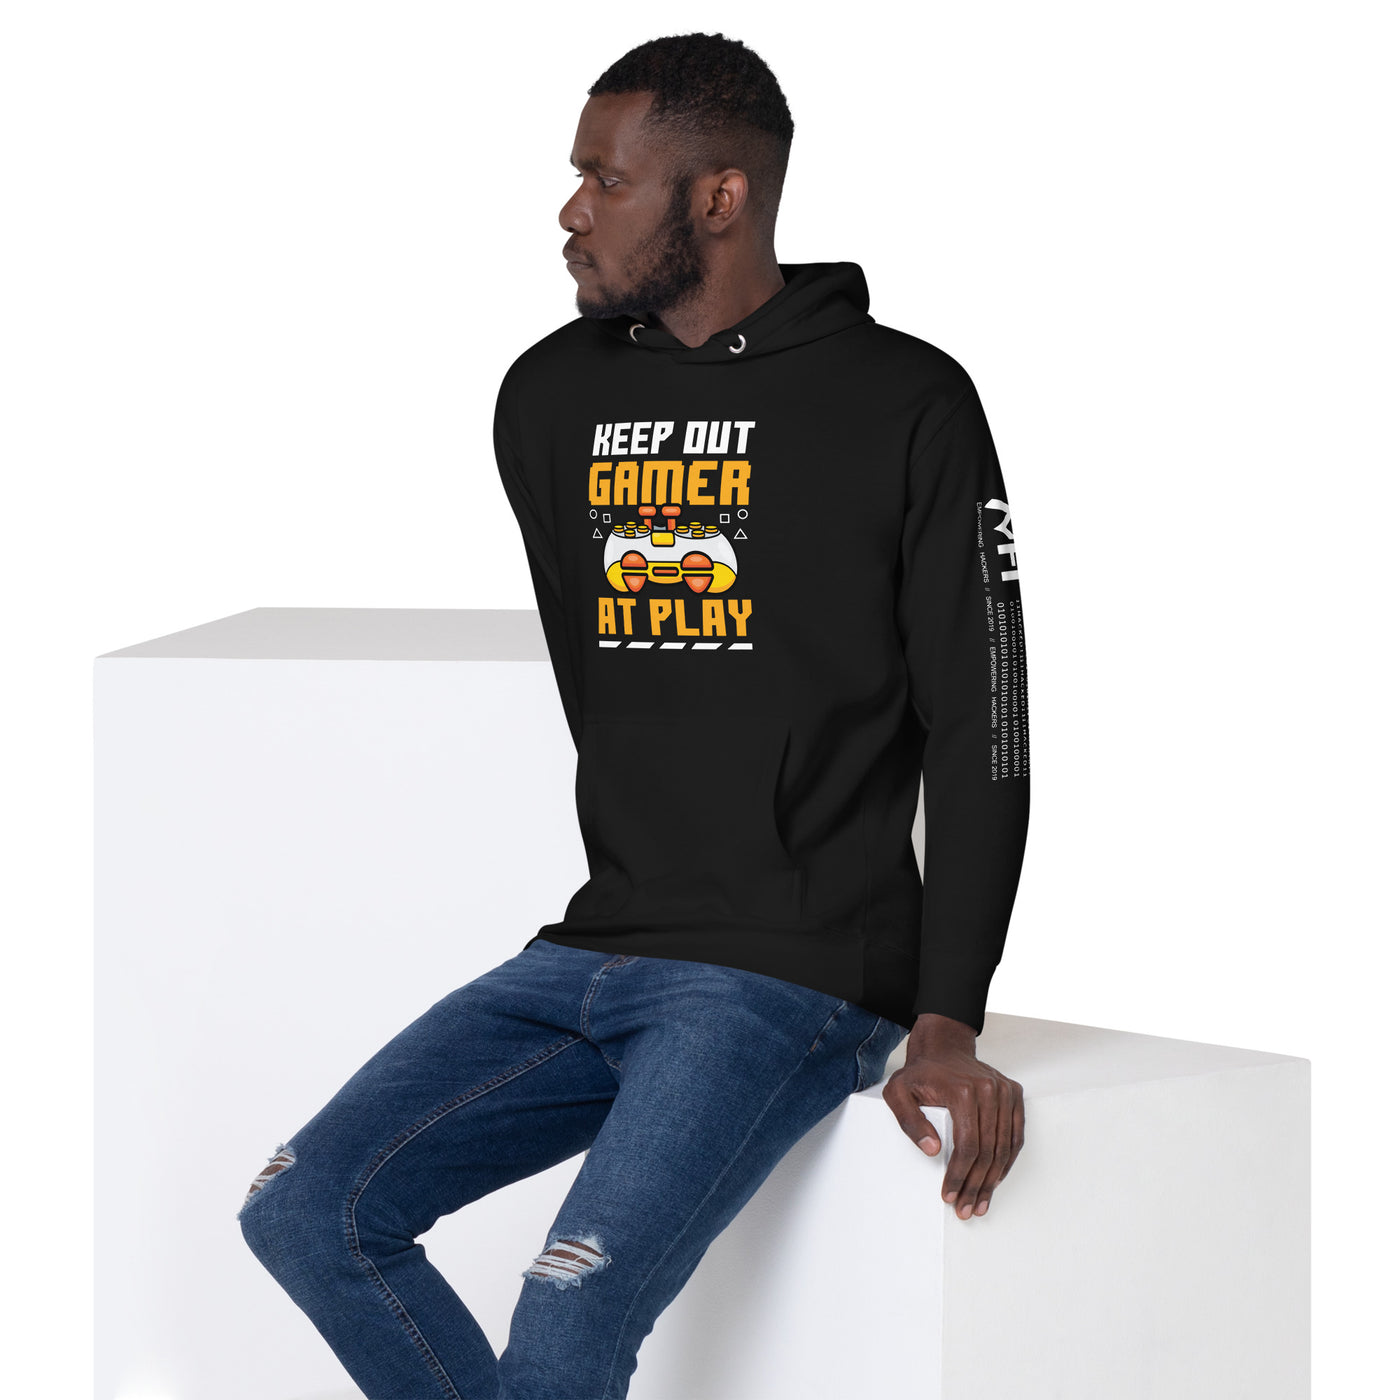 Keep Out Gamer At Play Rima 7 - Unisex Hoodie